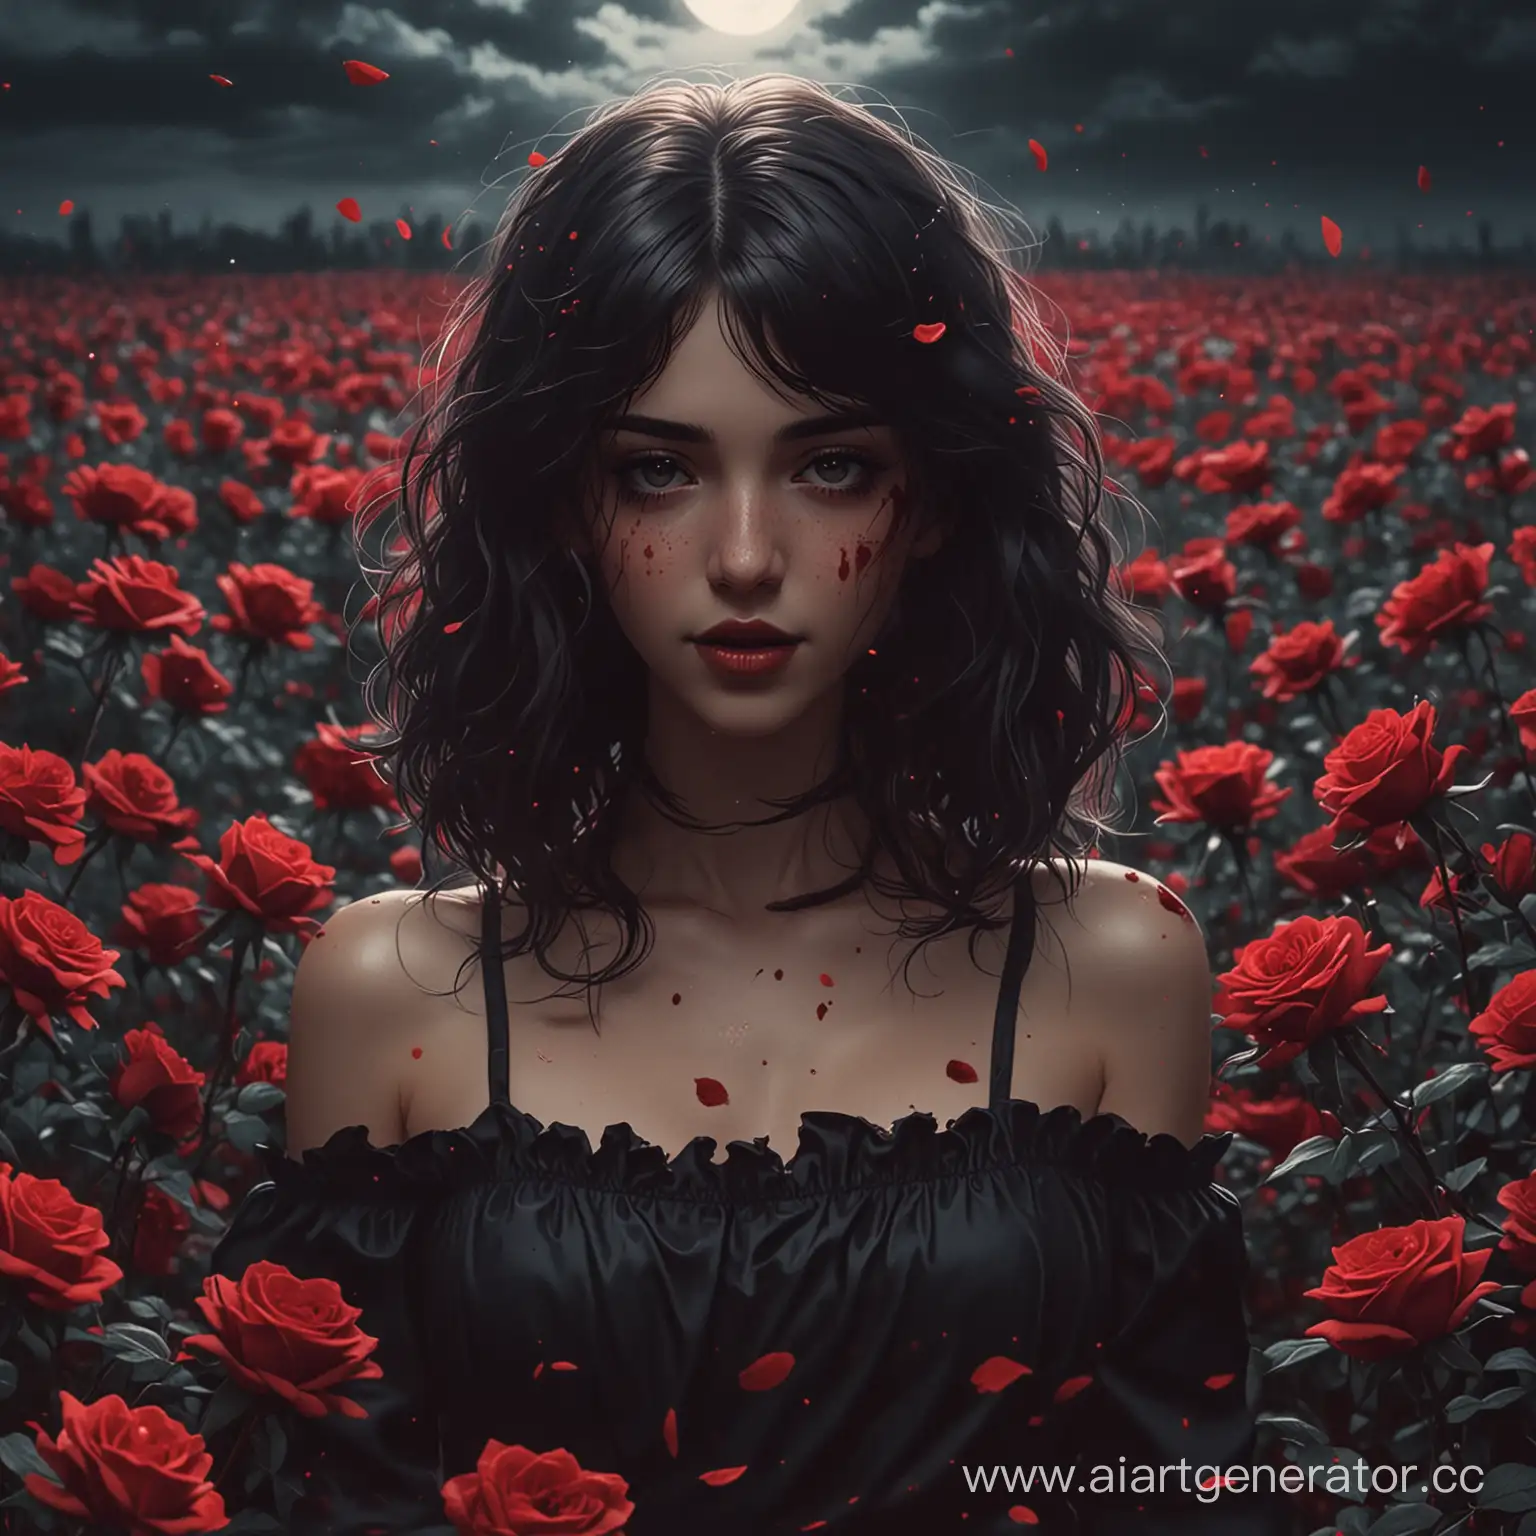 wave retro, cover of music style, Anime girl, Around the field of red roses and blood, dark aestetics, detail shadows and light